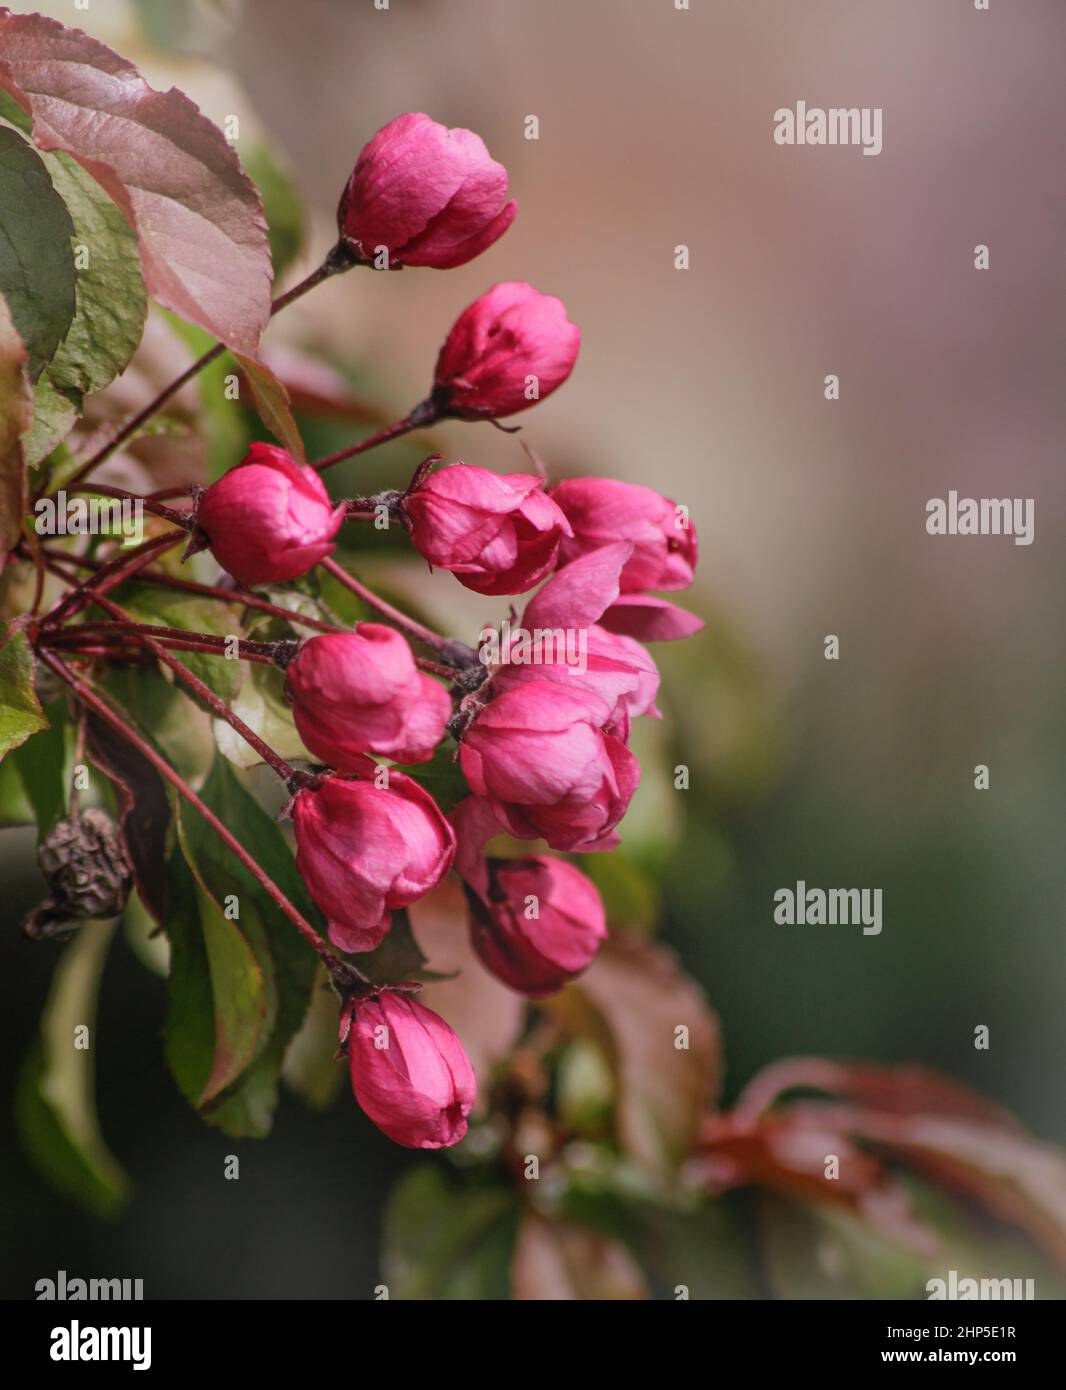 Vertical shot of flowering crab apple tree blossoms in the blurred background Stock Photo